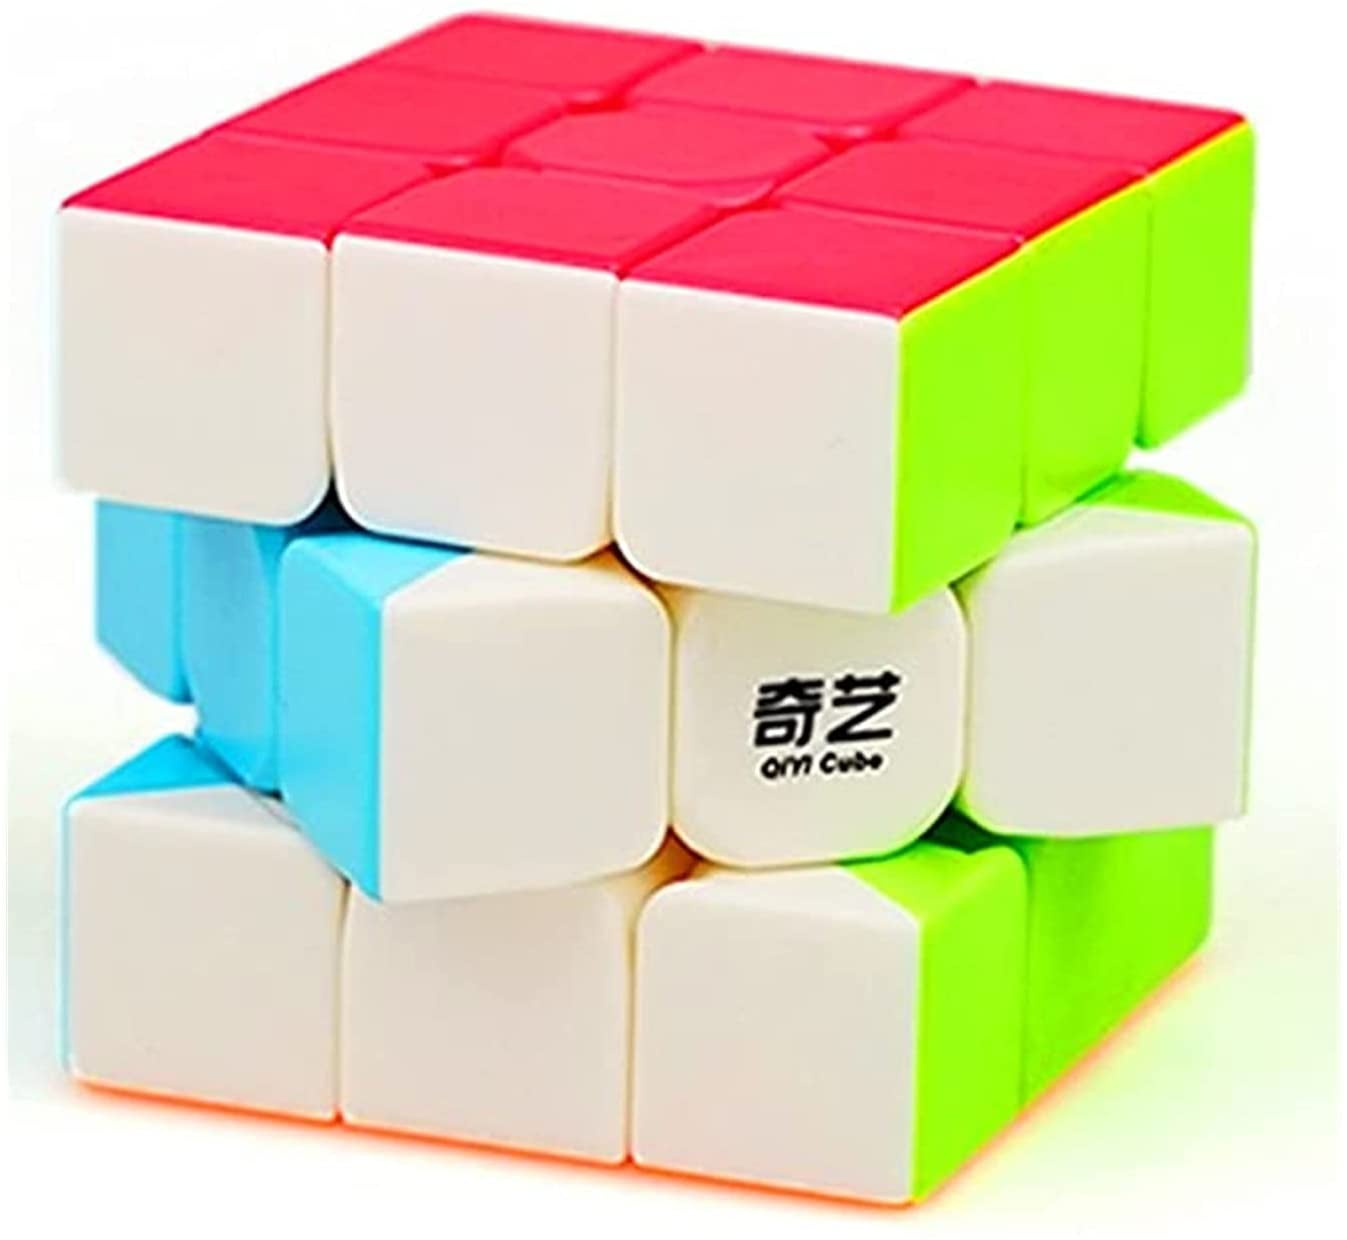 Details about   4x4 5x5 Pyramid Stickerless Fastest Speed cube magic twist puzzle cube kids Toy 